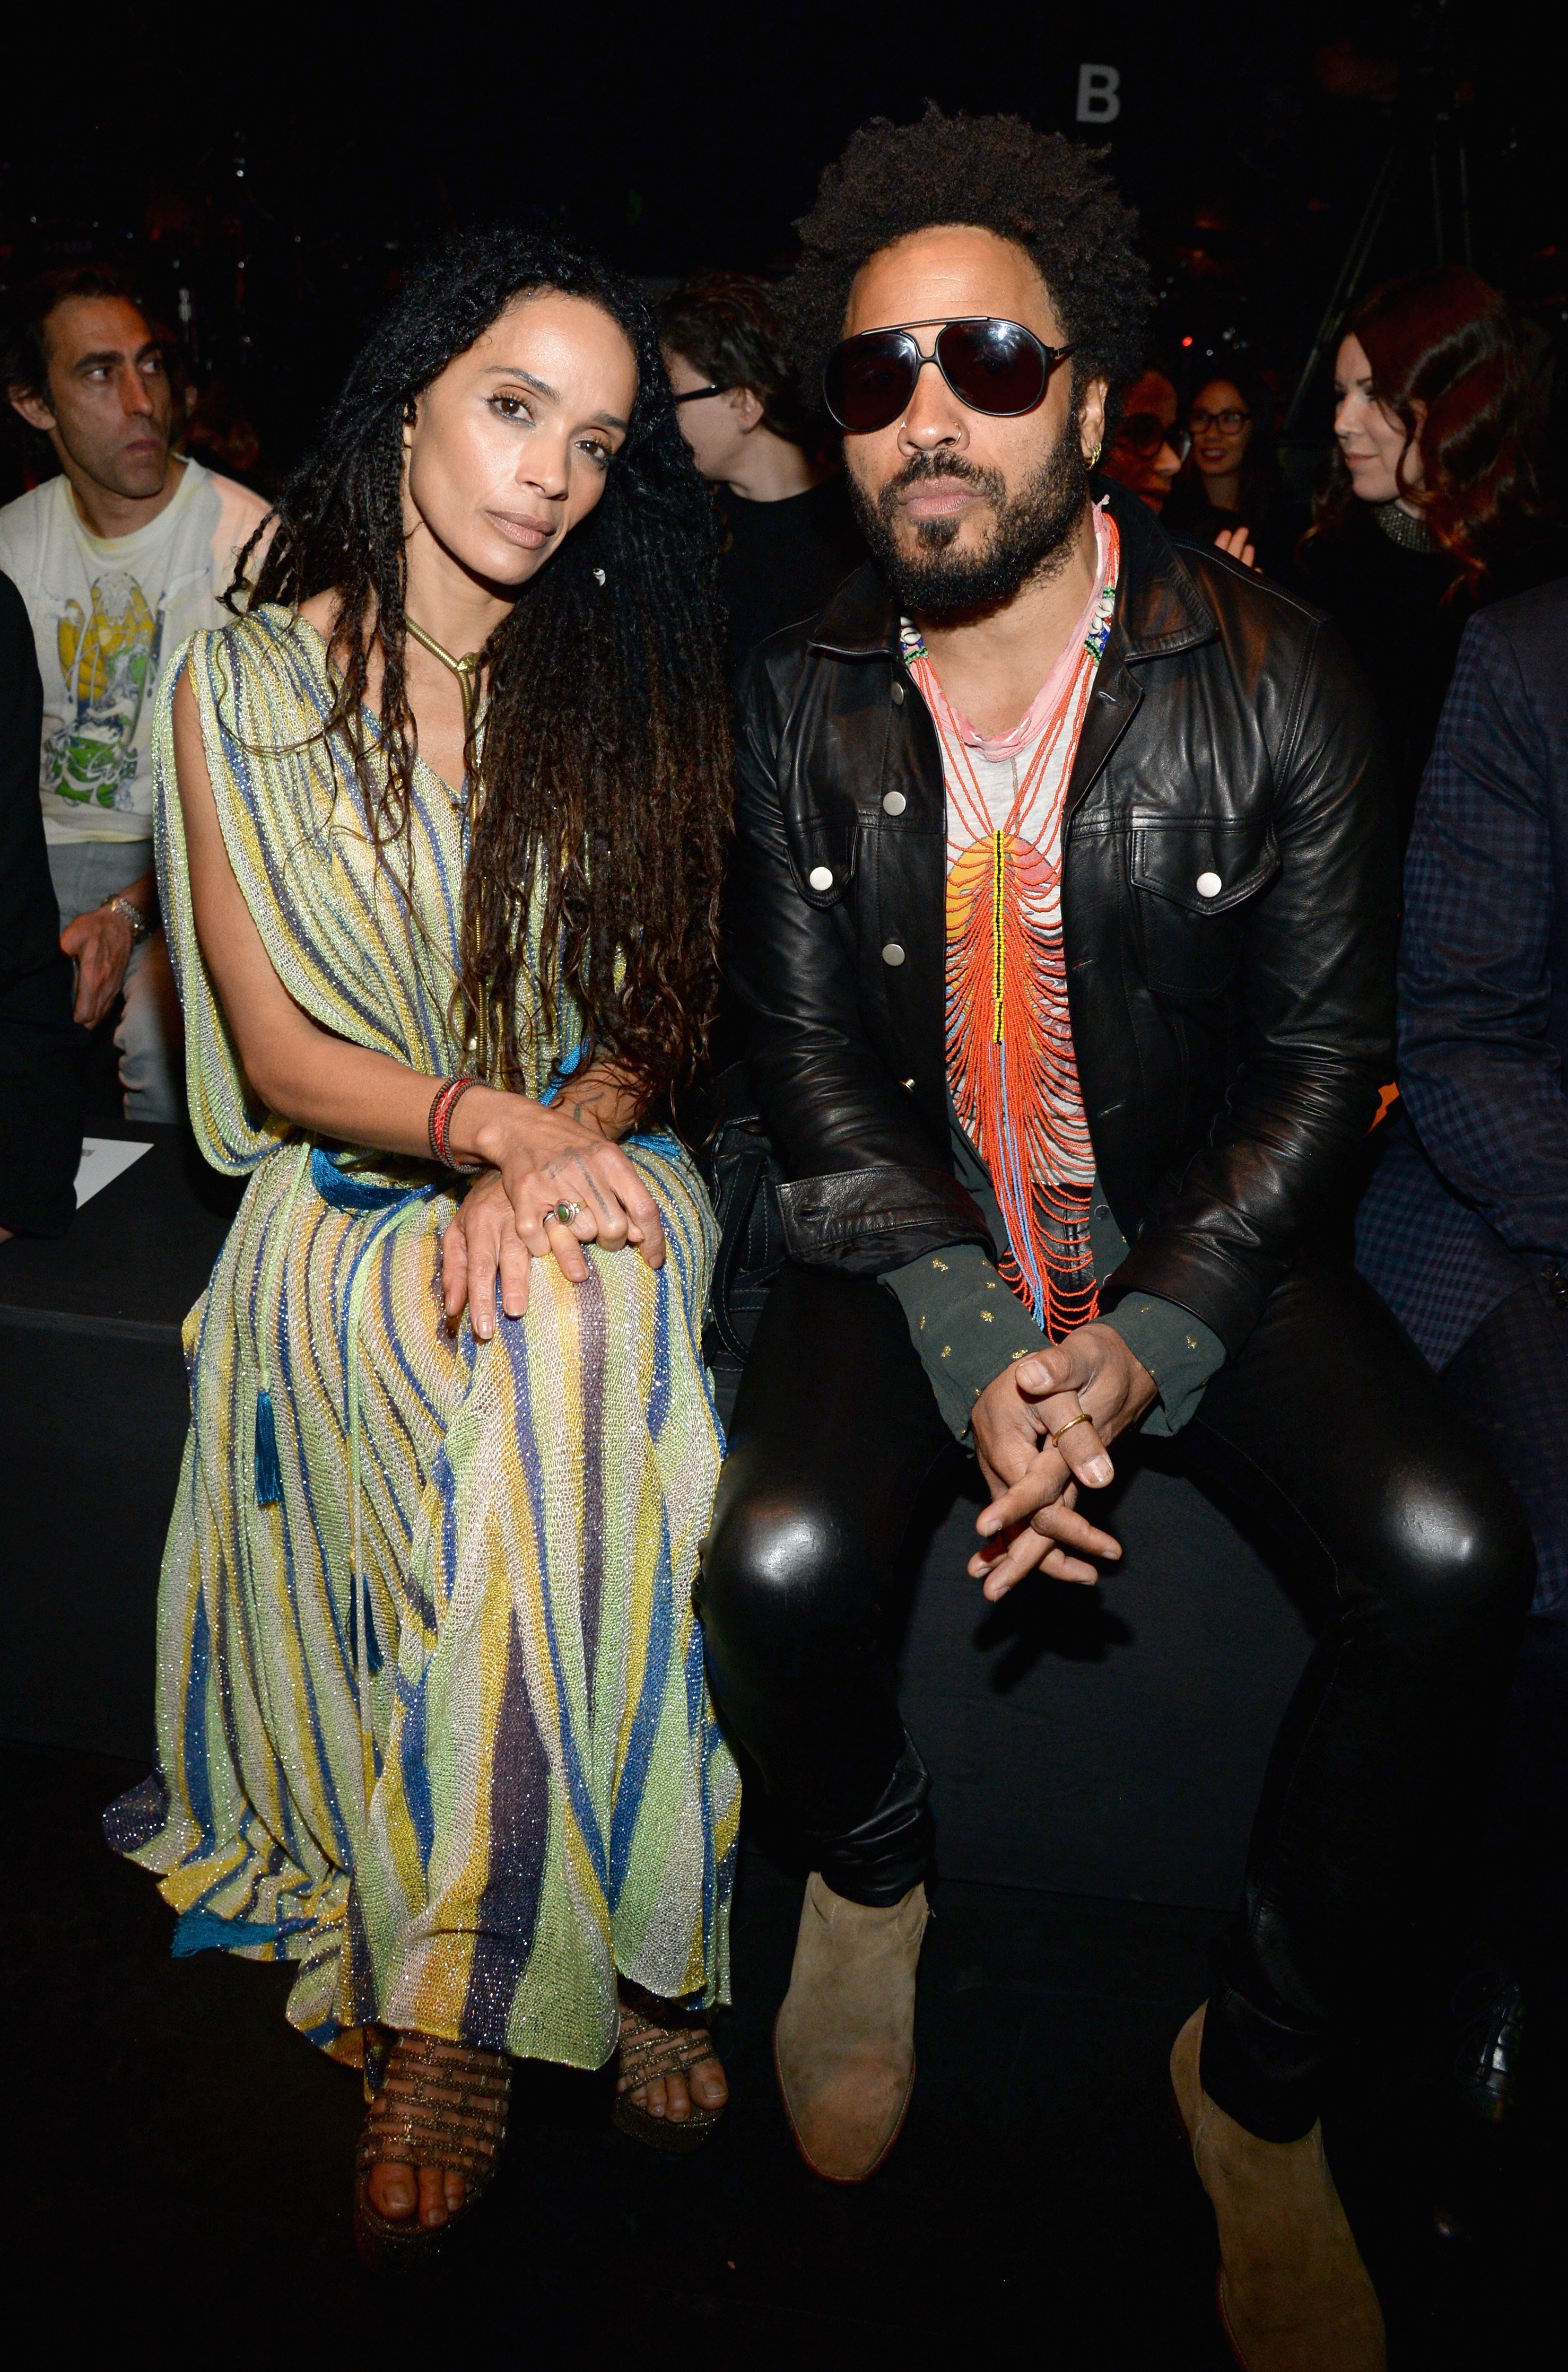 Lisa Bonet and Lenny Kravitz attend Saint Laurent at the Palladium on February 10, 2016 | Photo: GettyImages